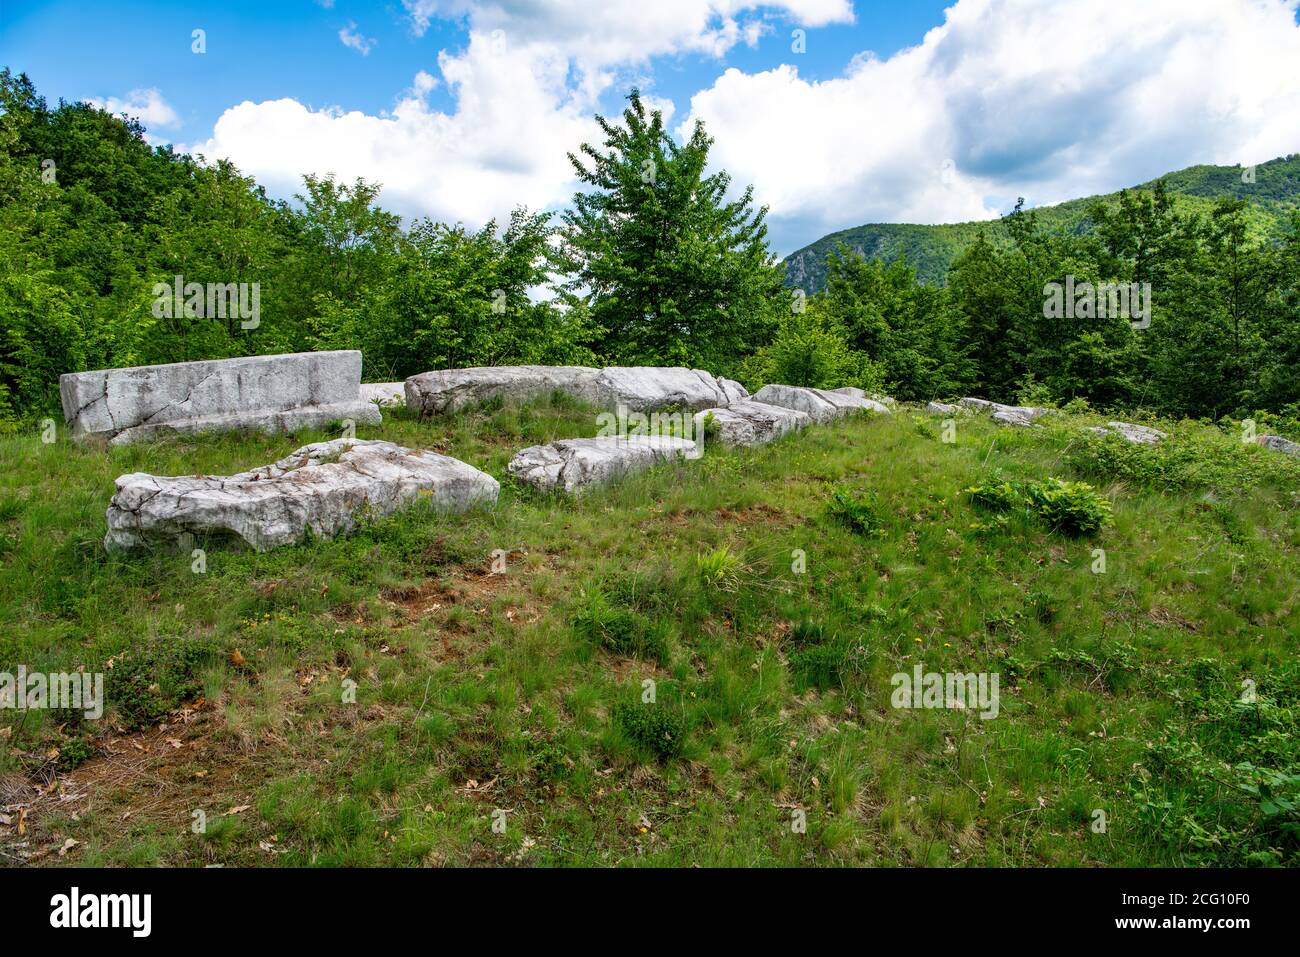 Medieval tombstones from 13Th century called Mramorje or Gajevi, located on Tara mountain near Krizevac village. Necropolis of different shapes. Stock Photo